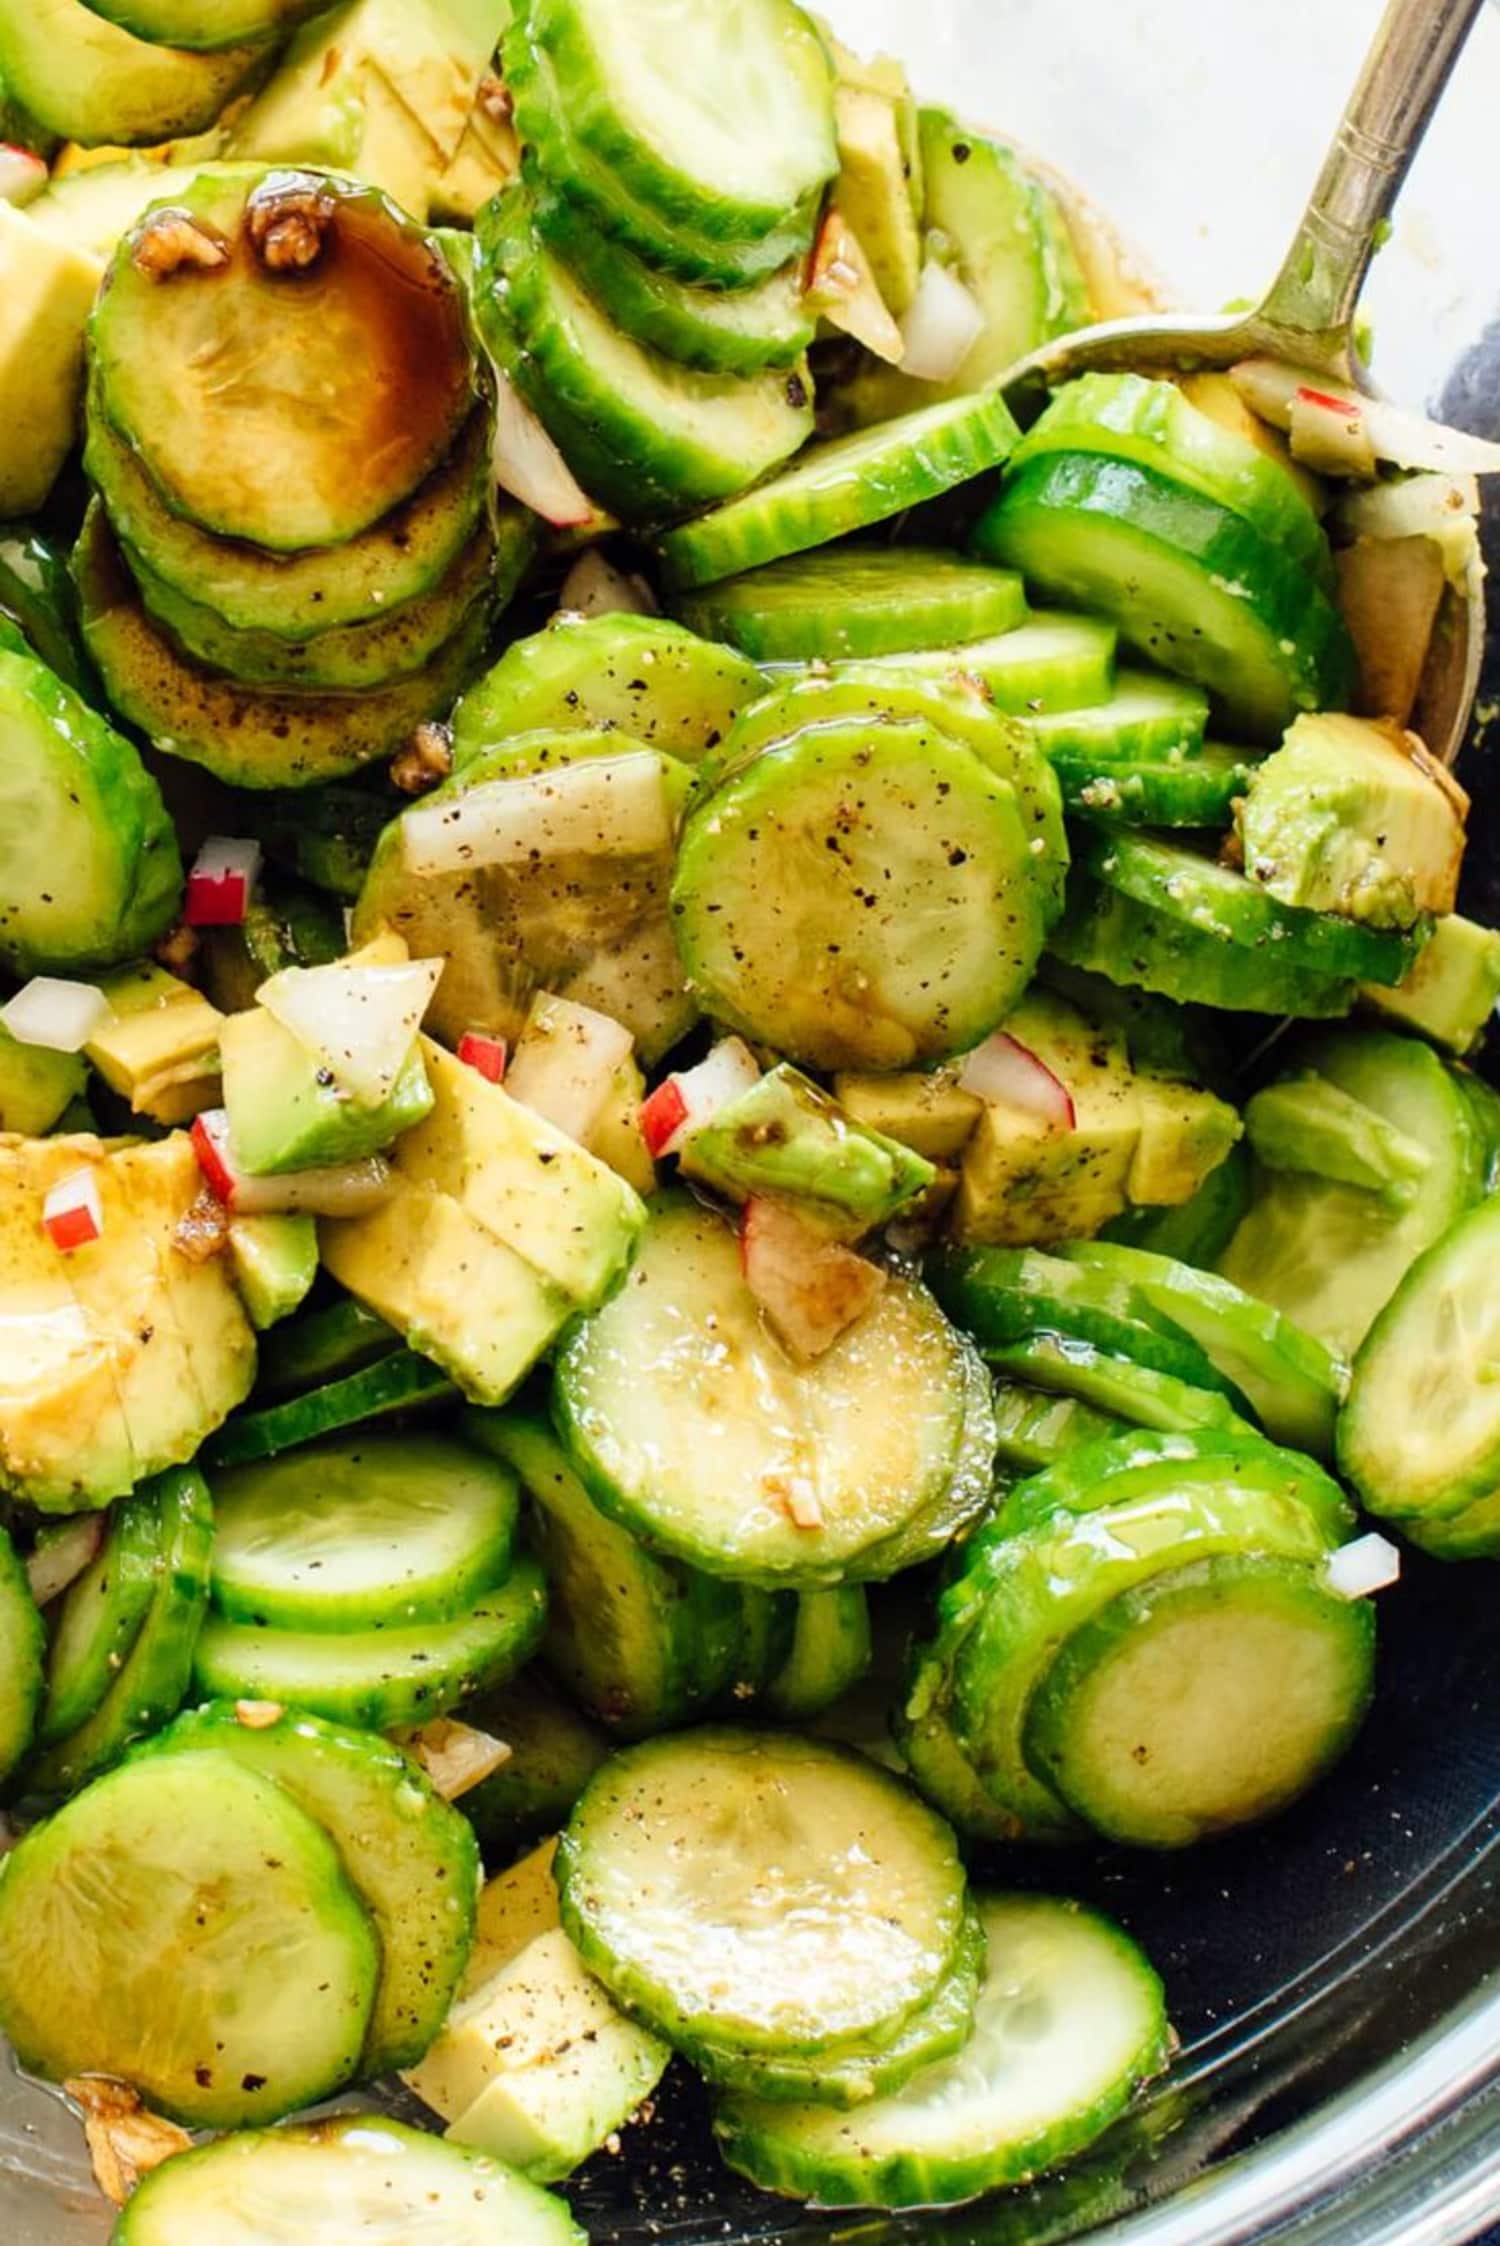 This Cool Cucumber and Avocado Salad Is Perfect for Summer | Kitchn